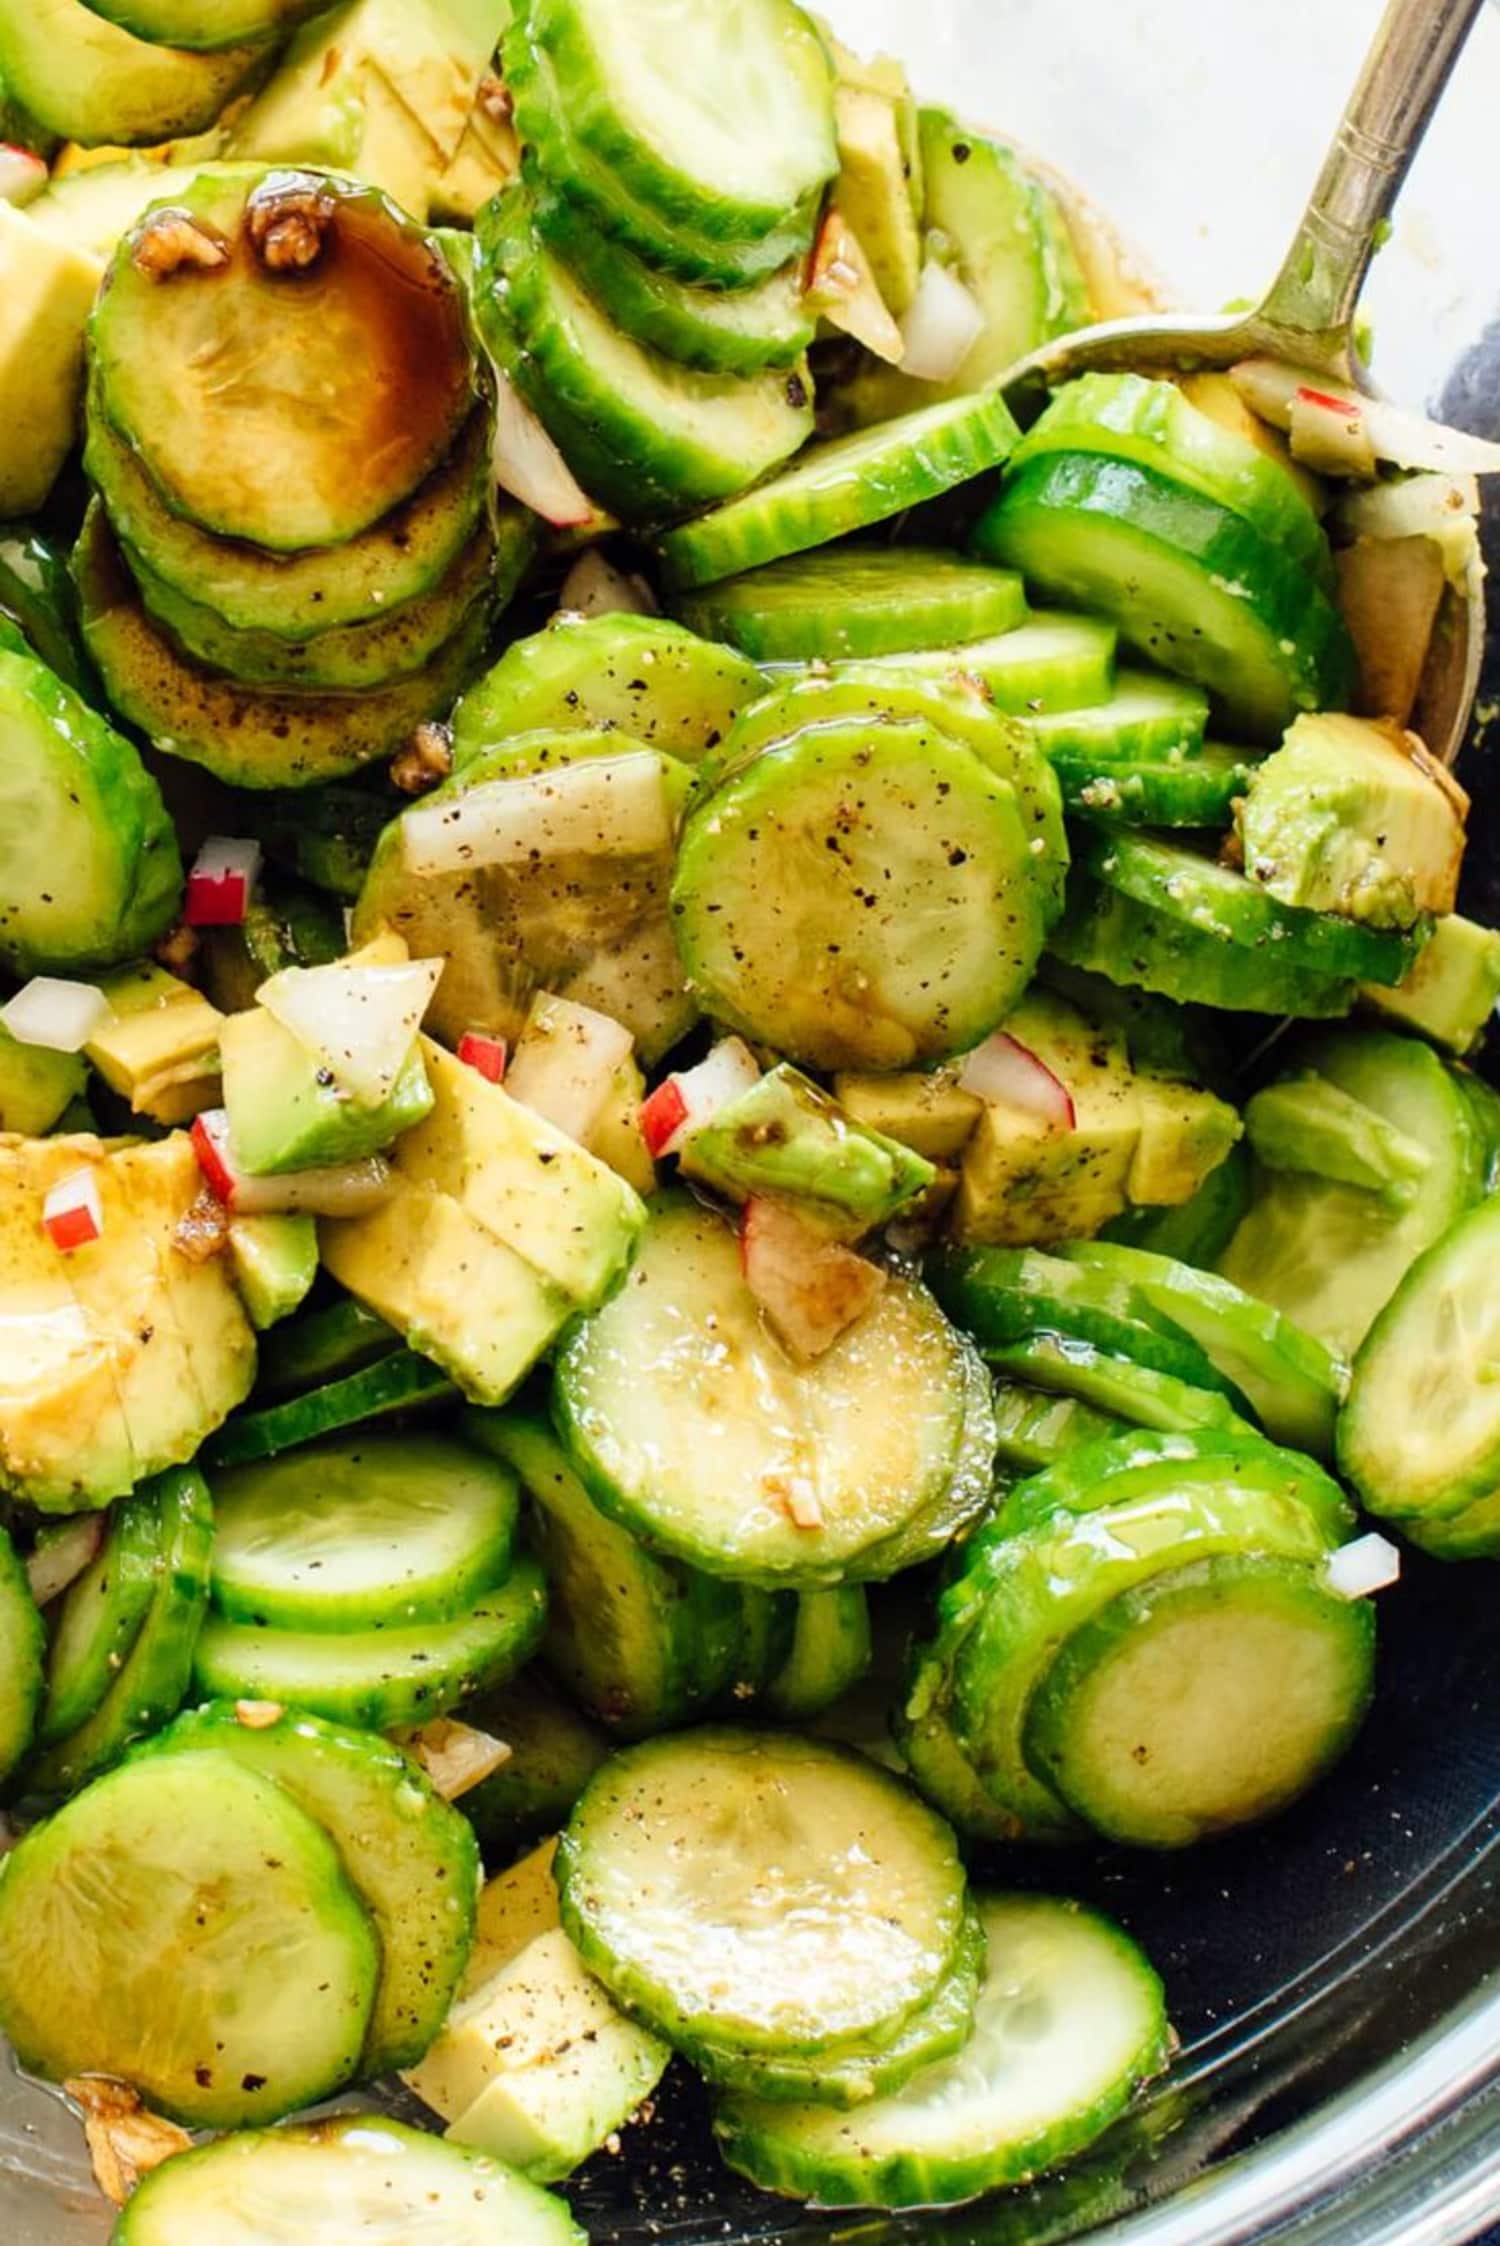 This Cool Cucumber and Avocado Salad Is Perfect for Summer | Kitchn